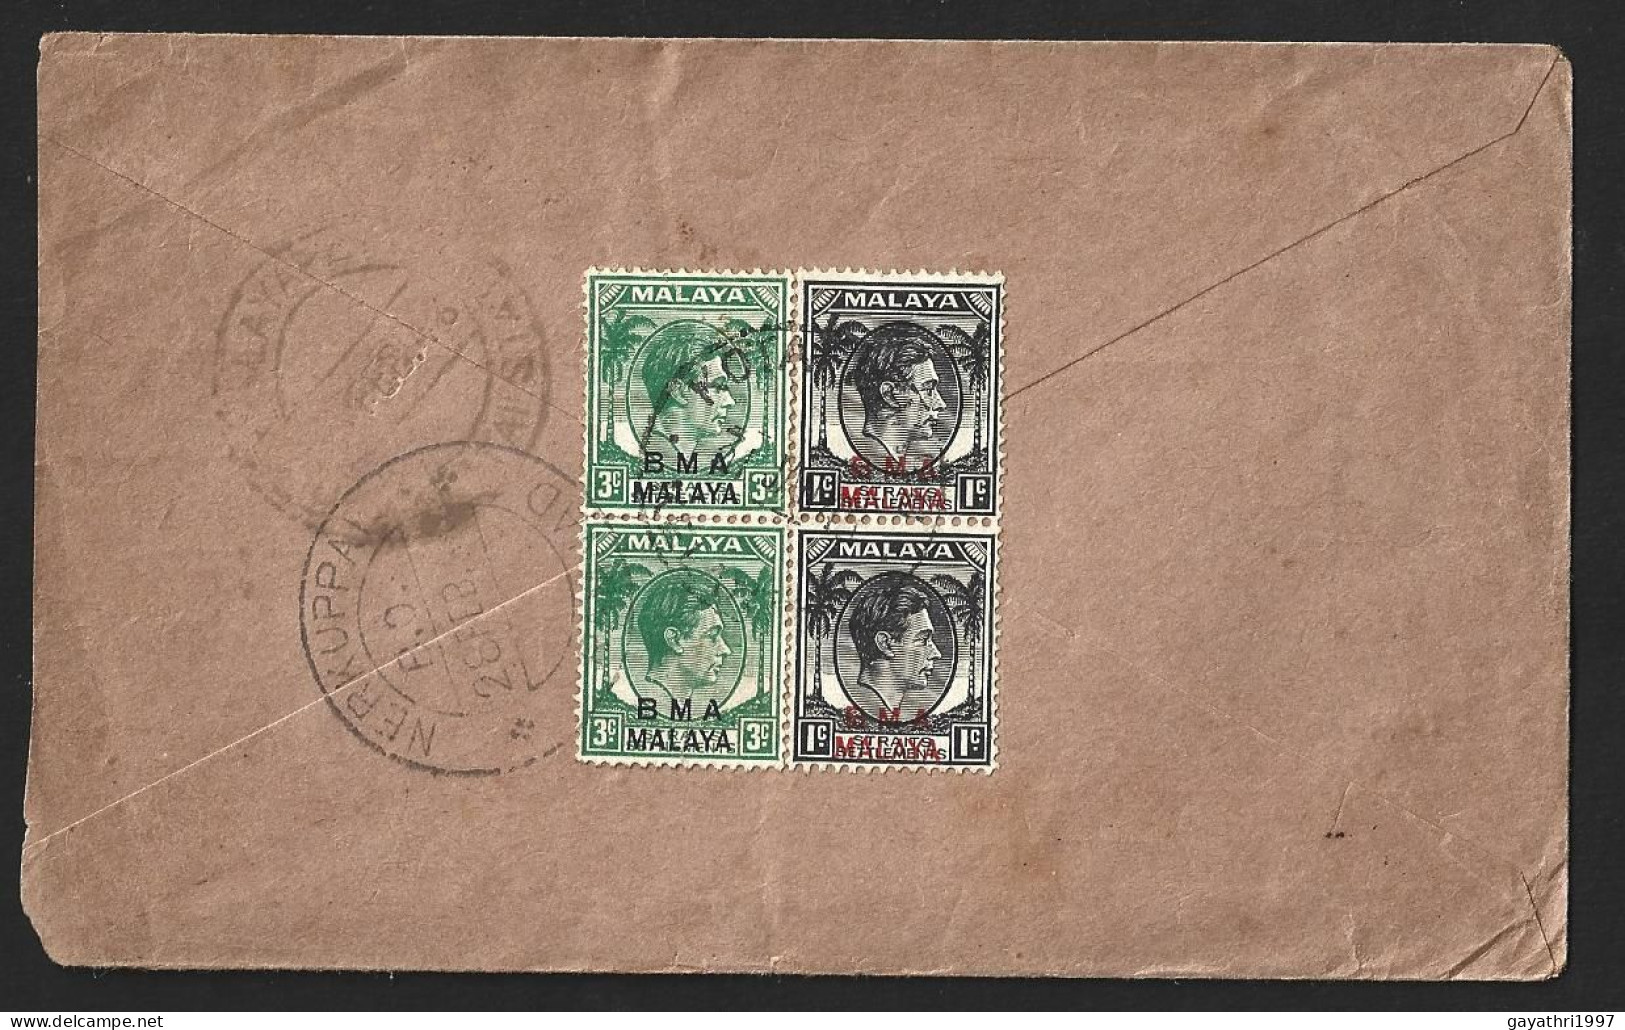 B.M.A. Malaya Stamp On Cover With RARE Cancellation Cover From Kota Bahru To Ndia (c760) - Malaya (British Military Administration)